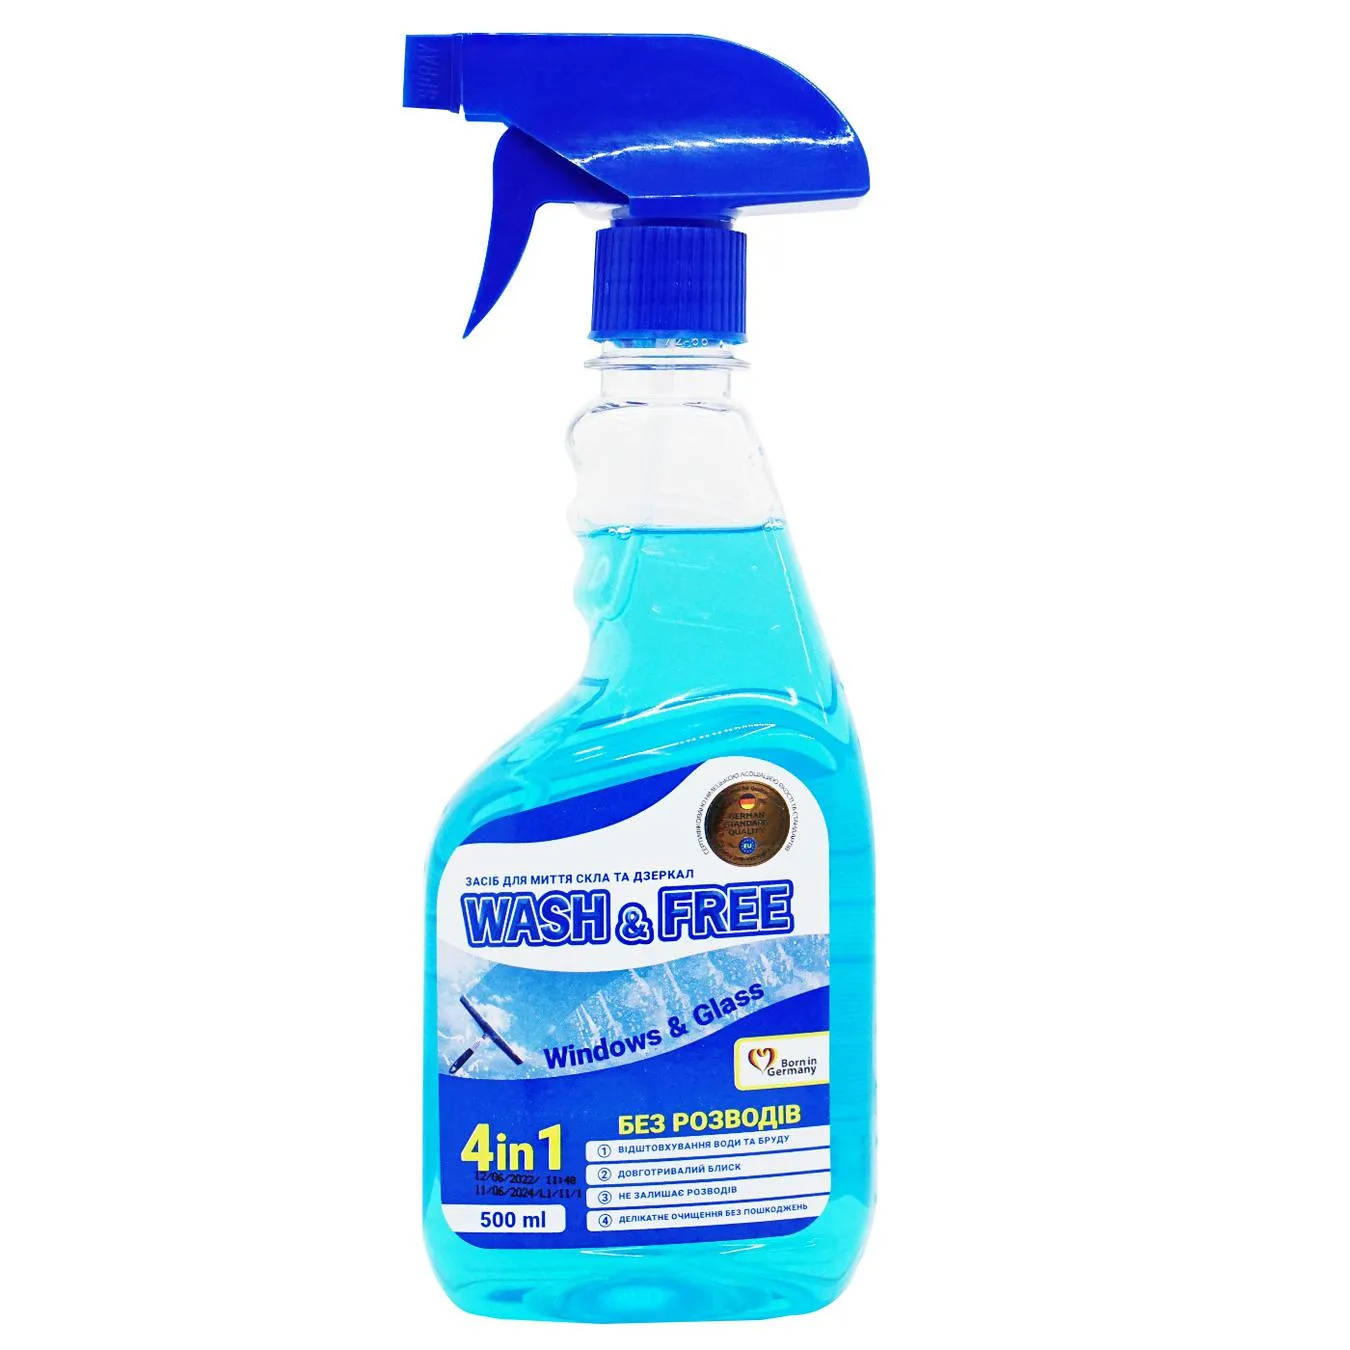 Wash Free glass and mirror cleaner 500g